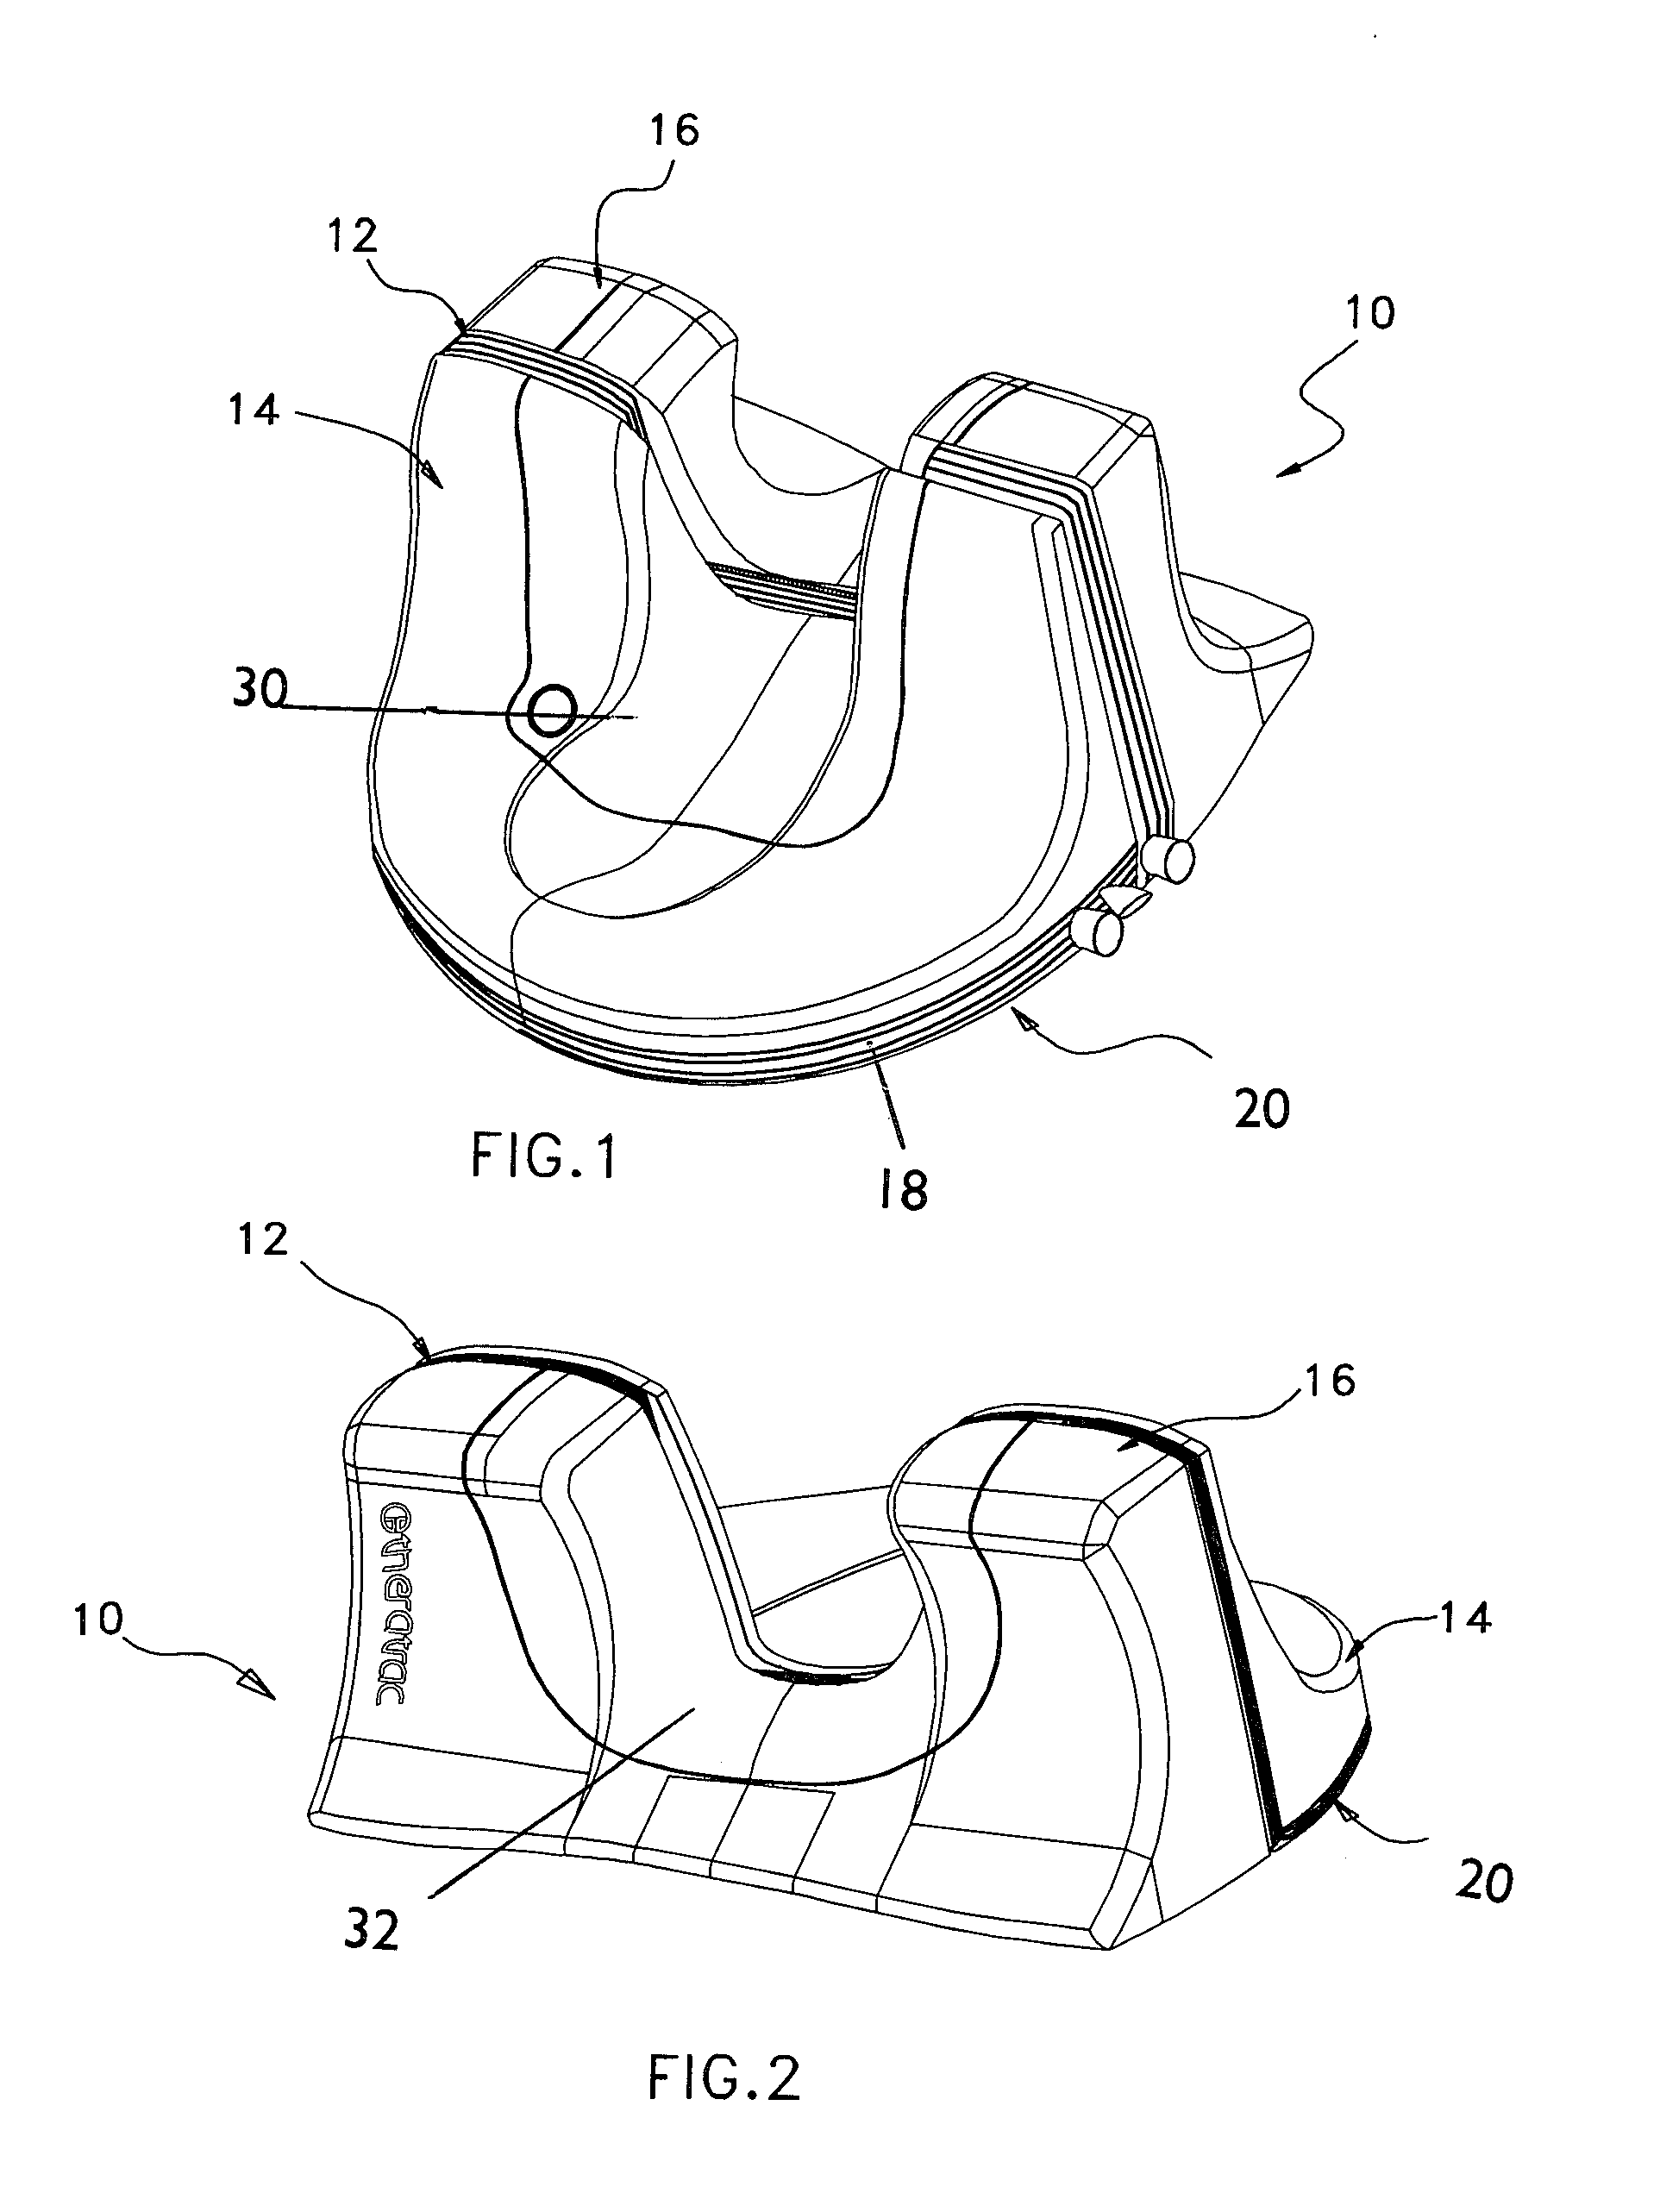 Cervical traction/stretch device